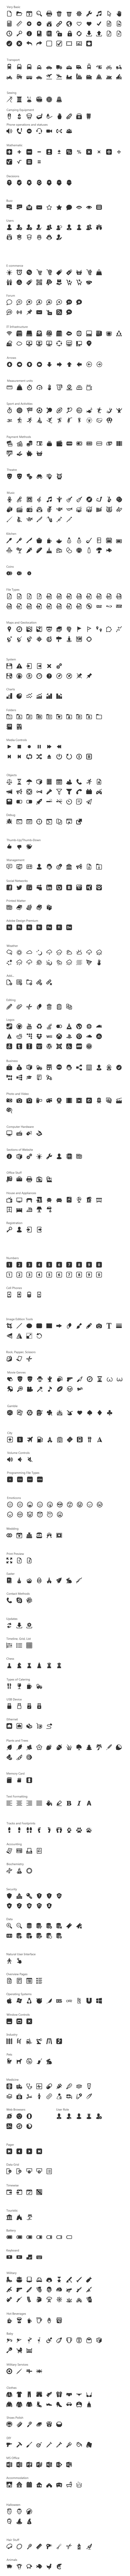 Windows 8 Monochrome Icons No Link + Vector Source + 1 Year of Updates License